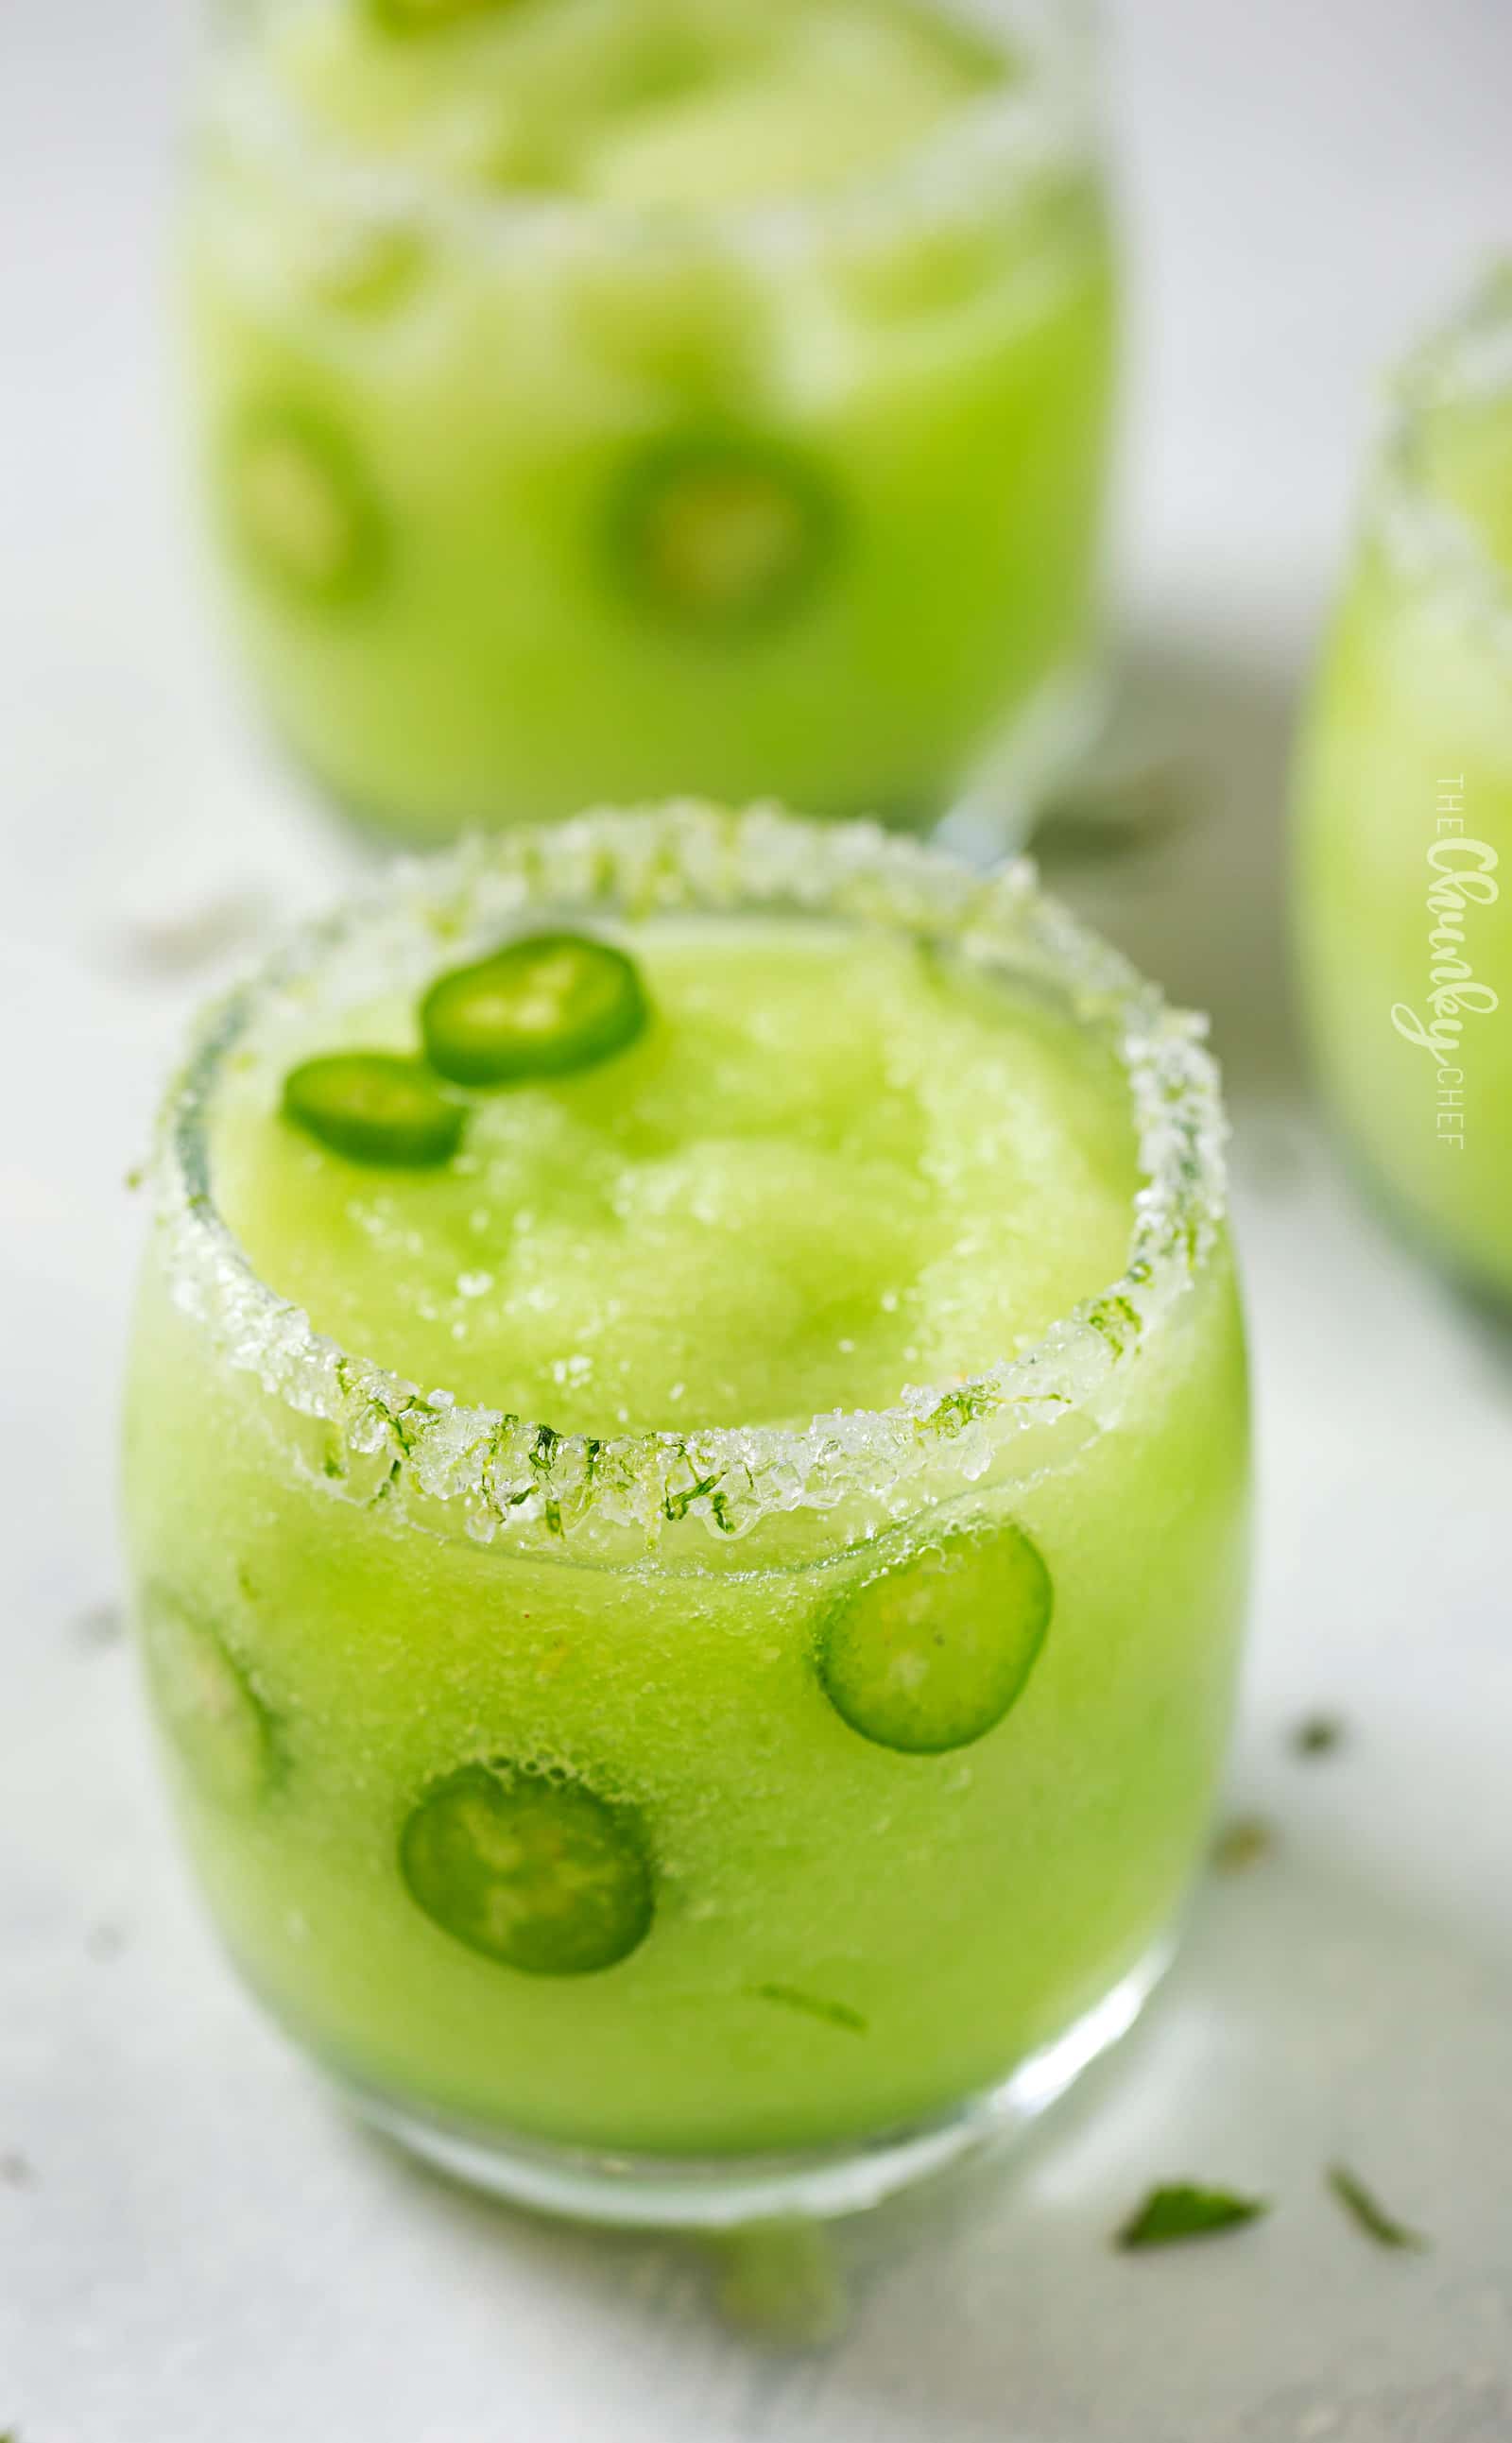 Frozen Honeydew Jalapeno Margarita | Jalapeno infused tequila is blended with fresh honeydew melon and ice to make a beautiful and refreshing summer margarita cocktail! | http://thechunkychef.com